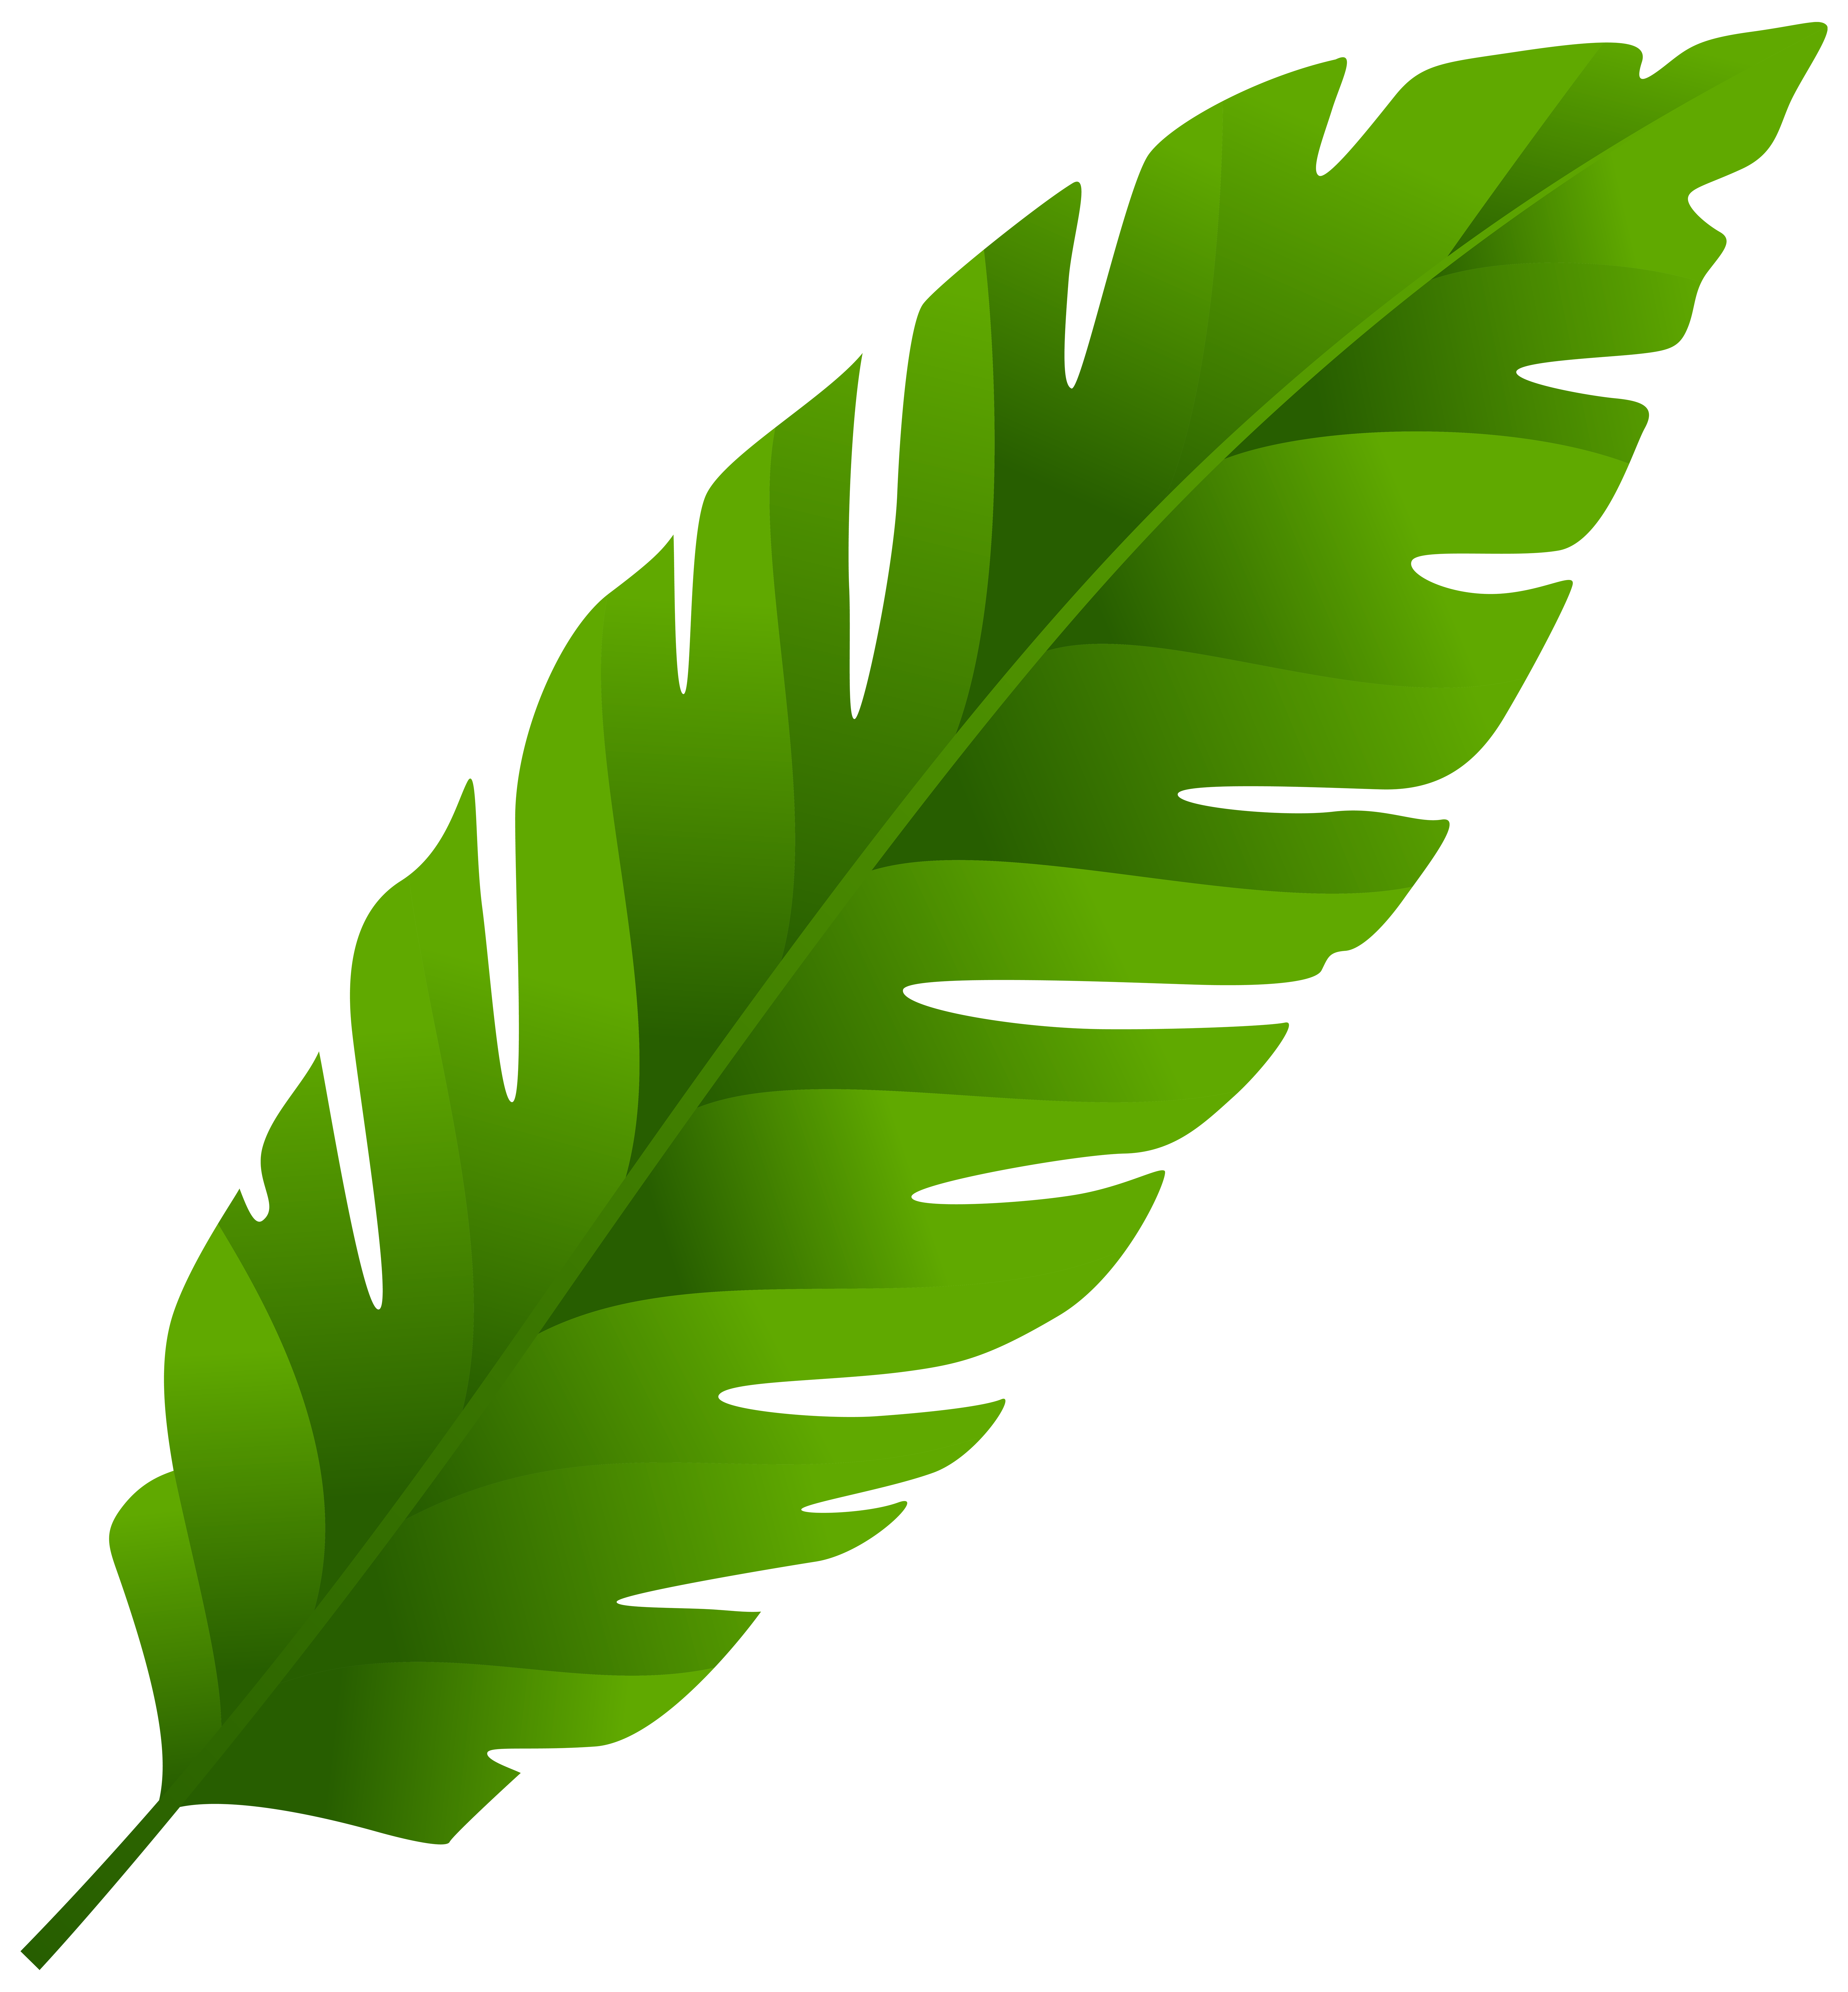 Maple Leaf Green PNG Clip Art Image​  Gallery Yopriceville - High-Quality  Free Images and Transparent PNG Clipart